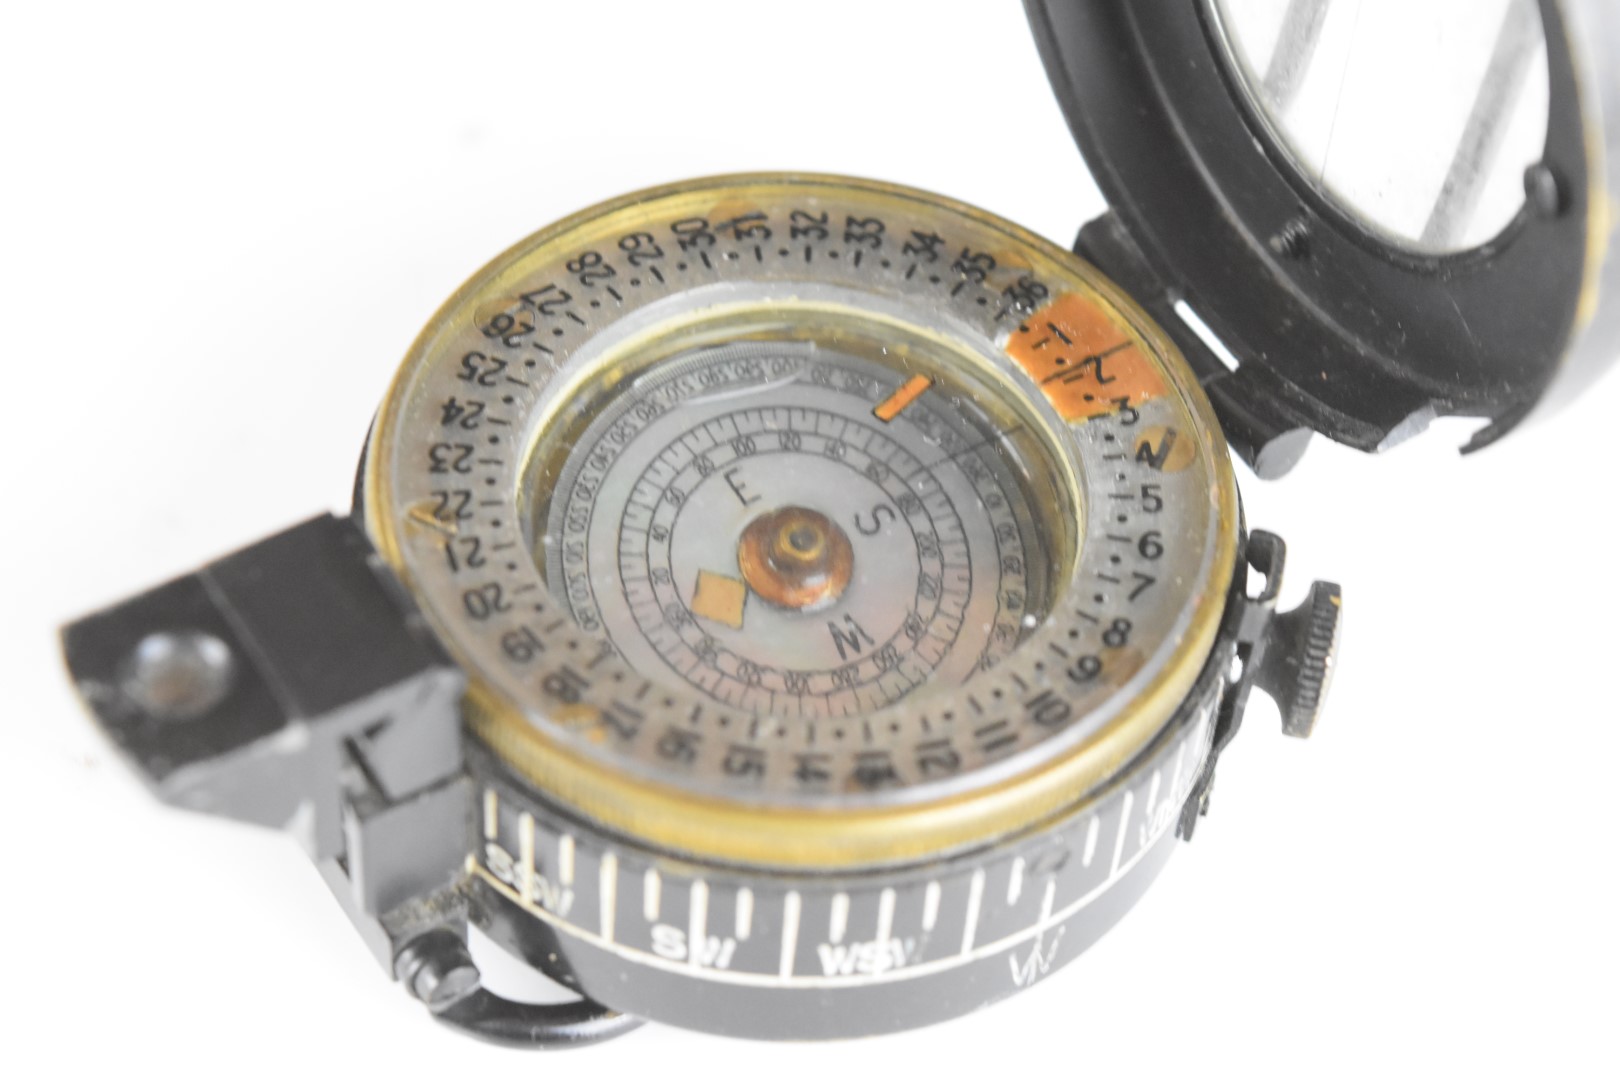 British WW2 prismatic compass by T G Co Ltd, London No B187104 1942 Mk III, with broad arrow mark, - Image 10 of 10